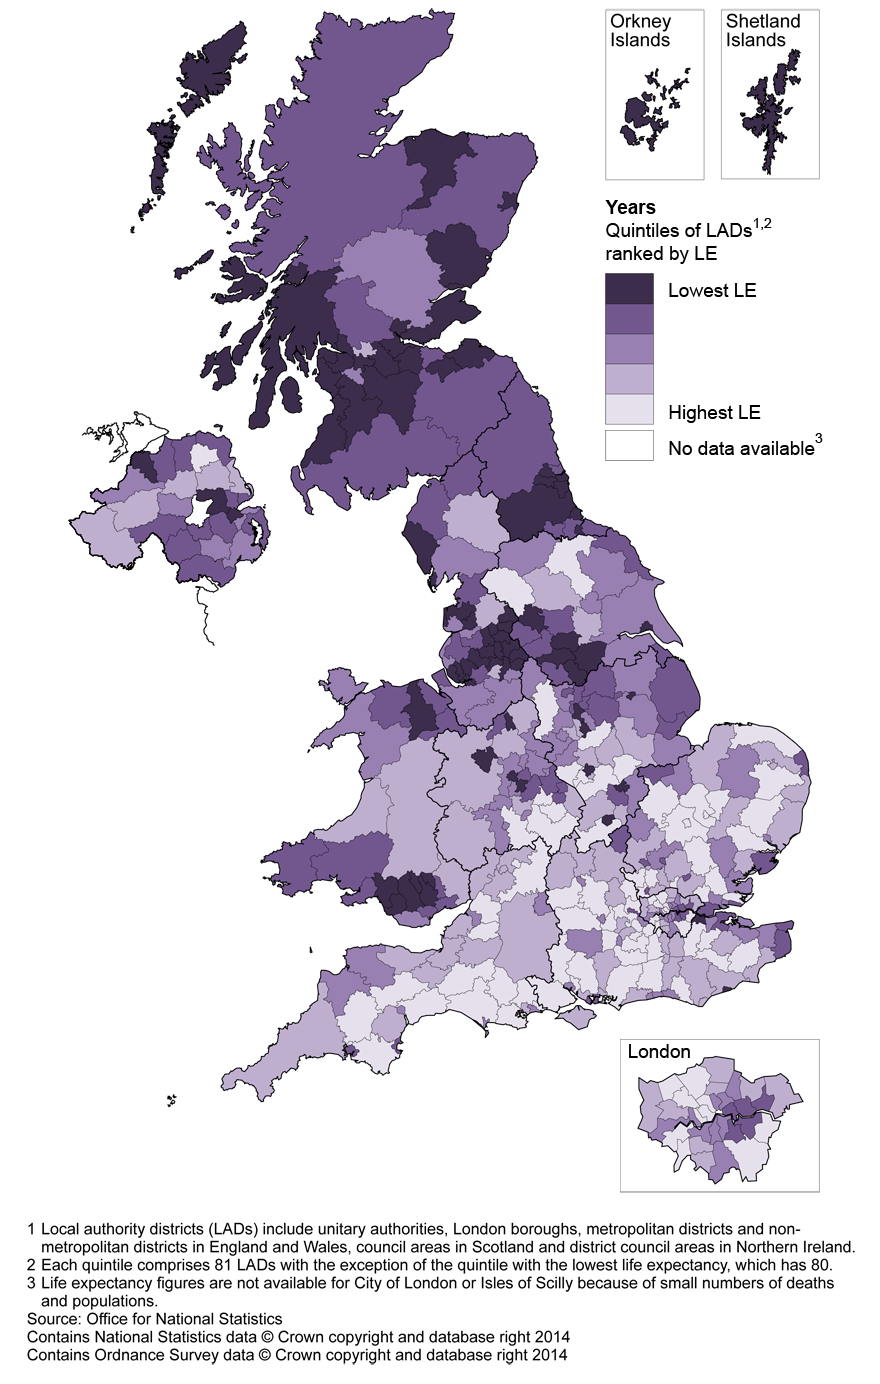 Map 2: Life expectancy (LE) for females at birth by local authority district, United Kingdom, 2010–12